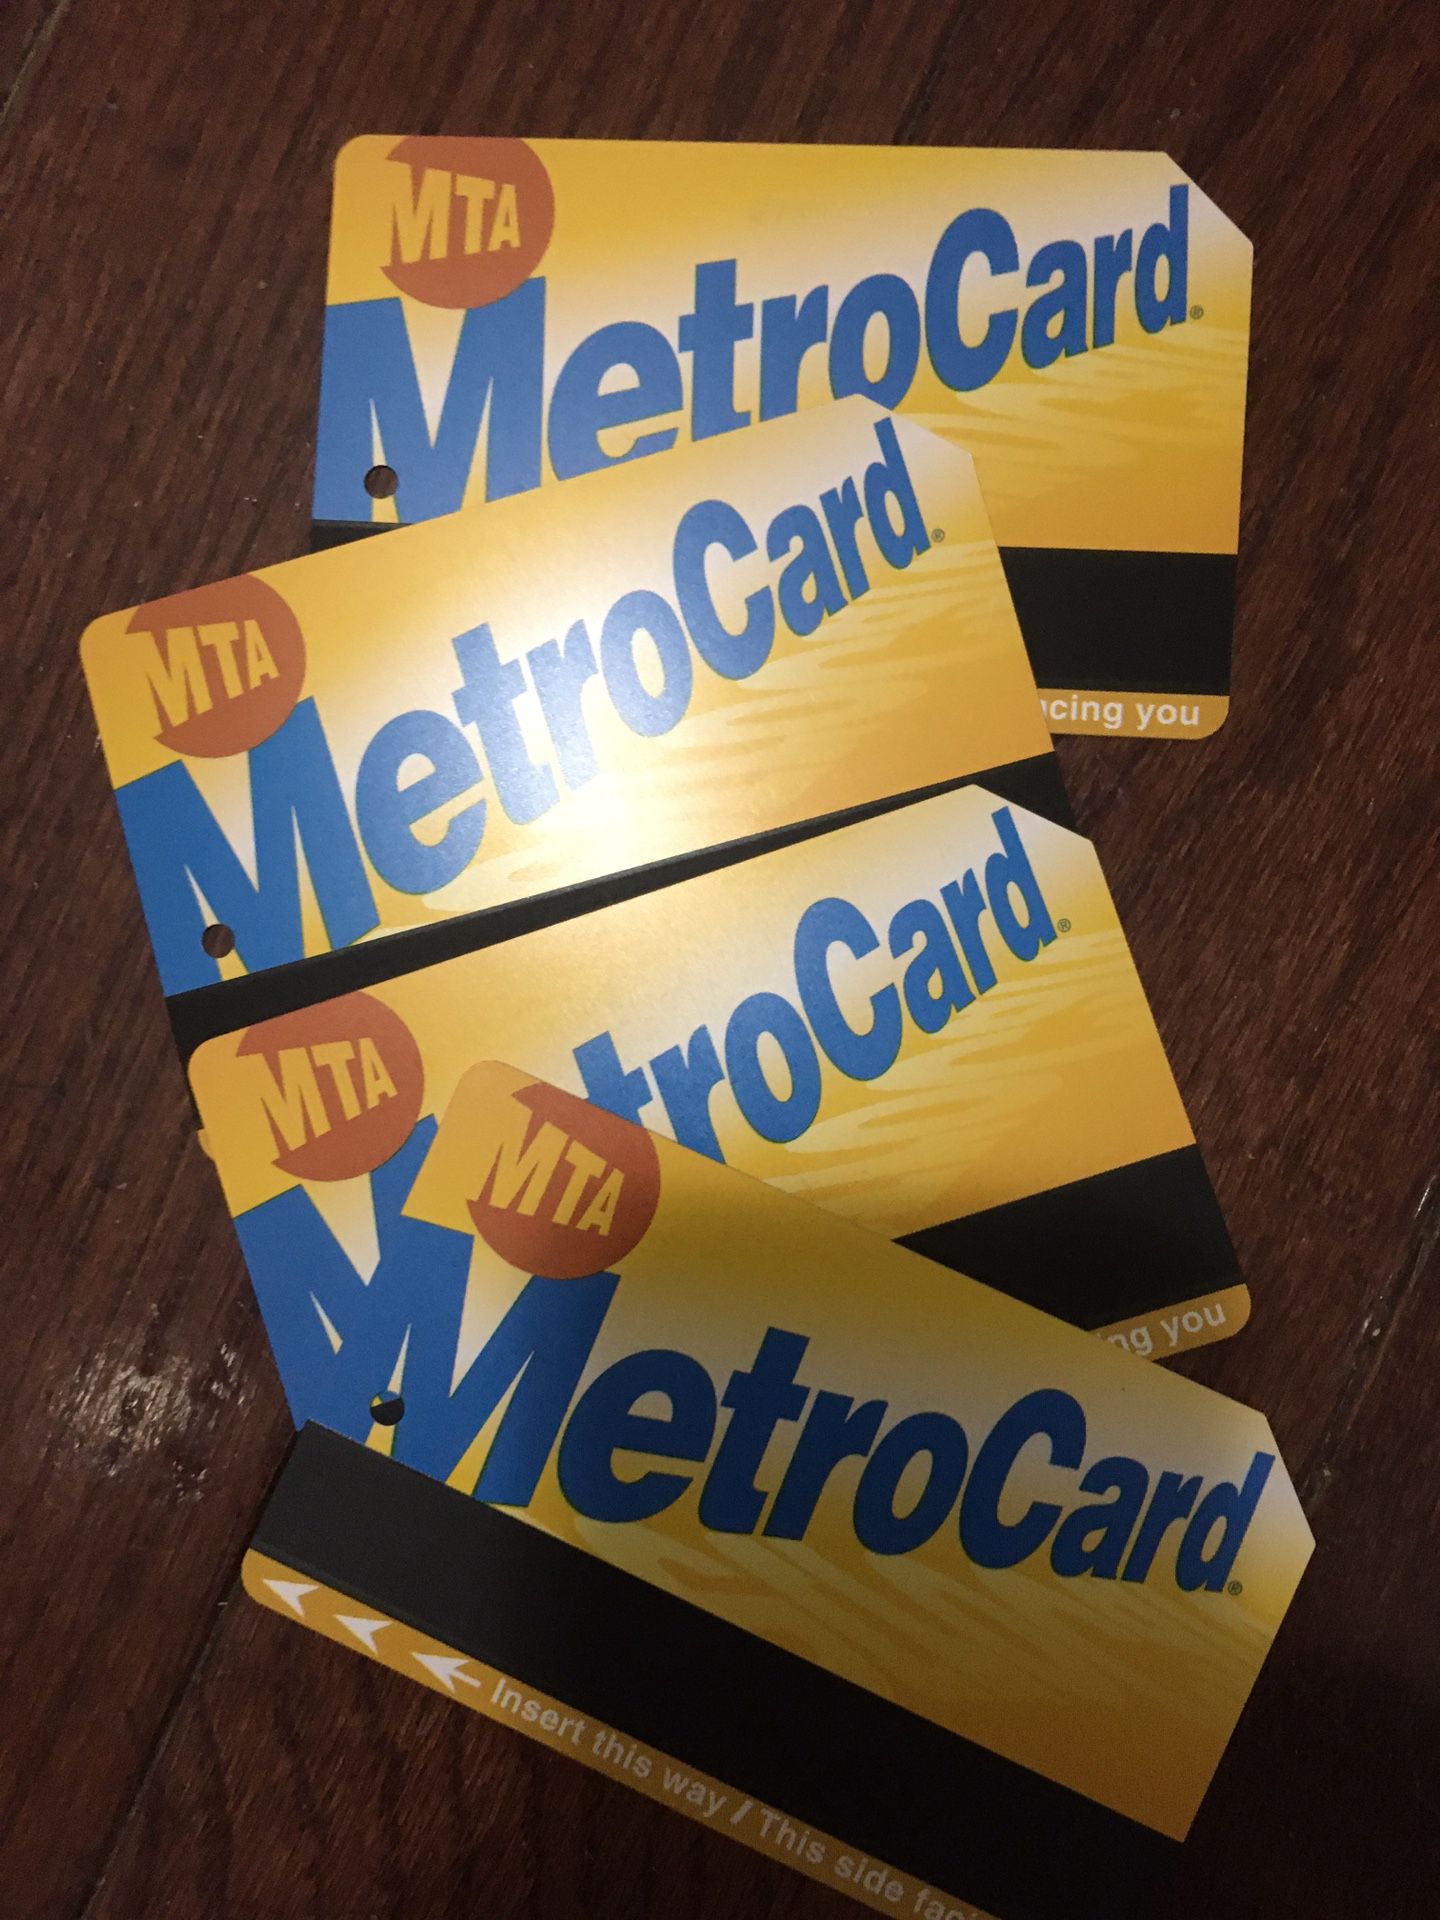 NYC MTA Metro Cards $55 for $35